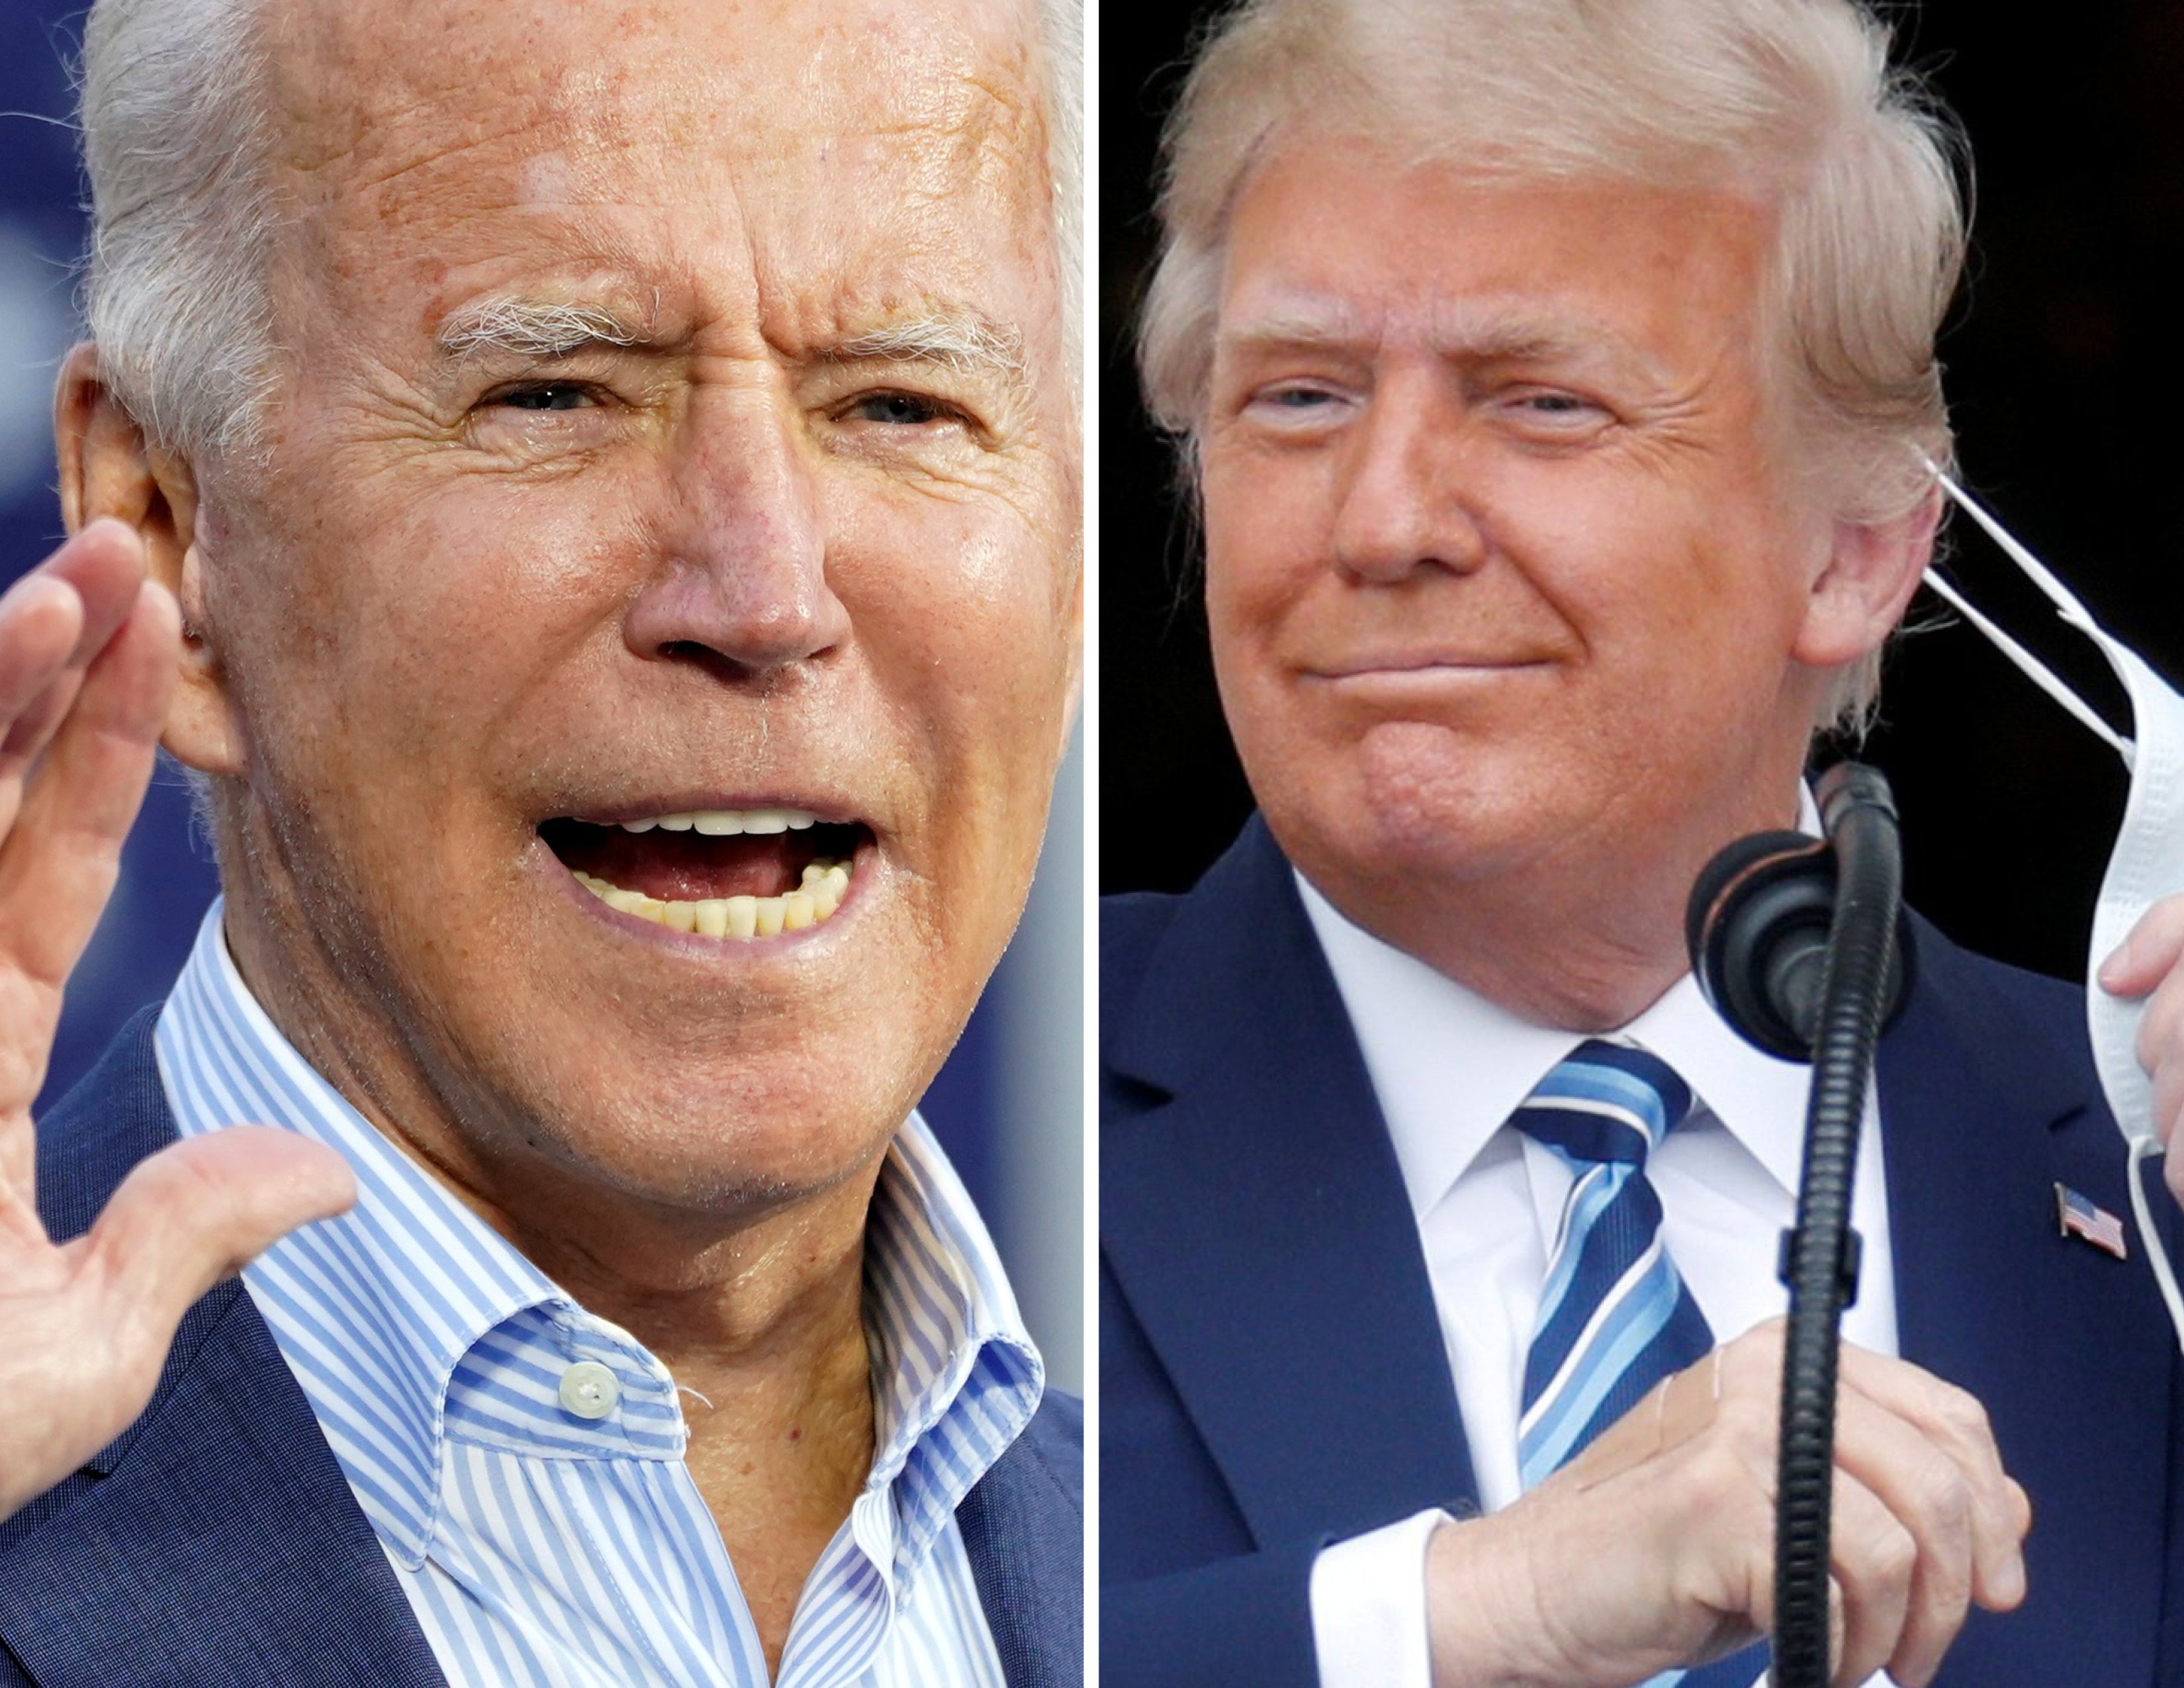 Majority Of Muslims Voted For Biden, But Trump Got More Support Than He Did  In 2016 : NPR